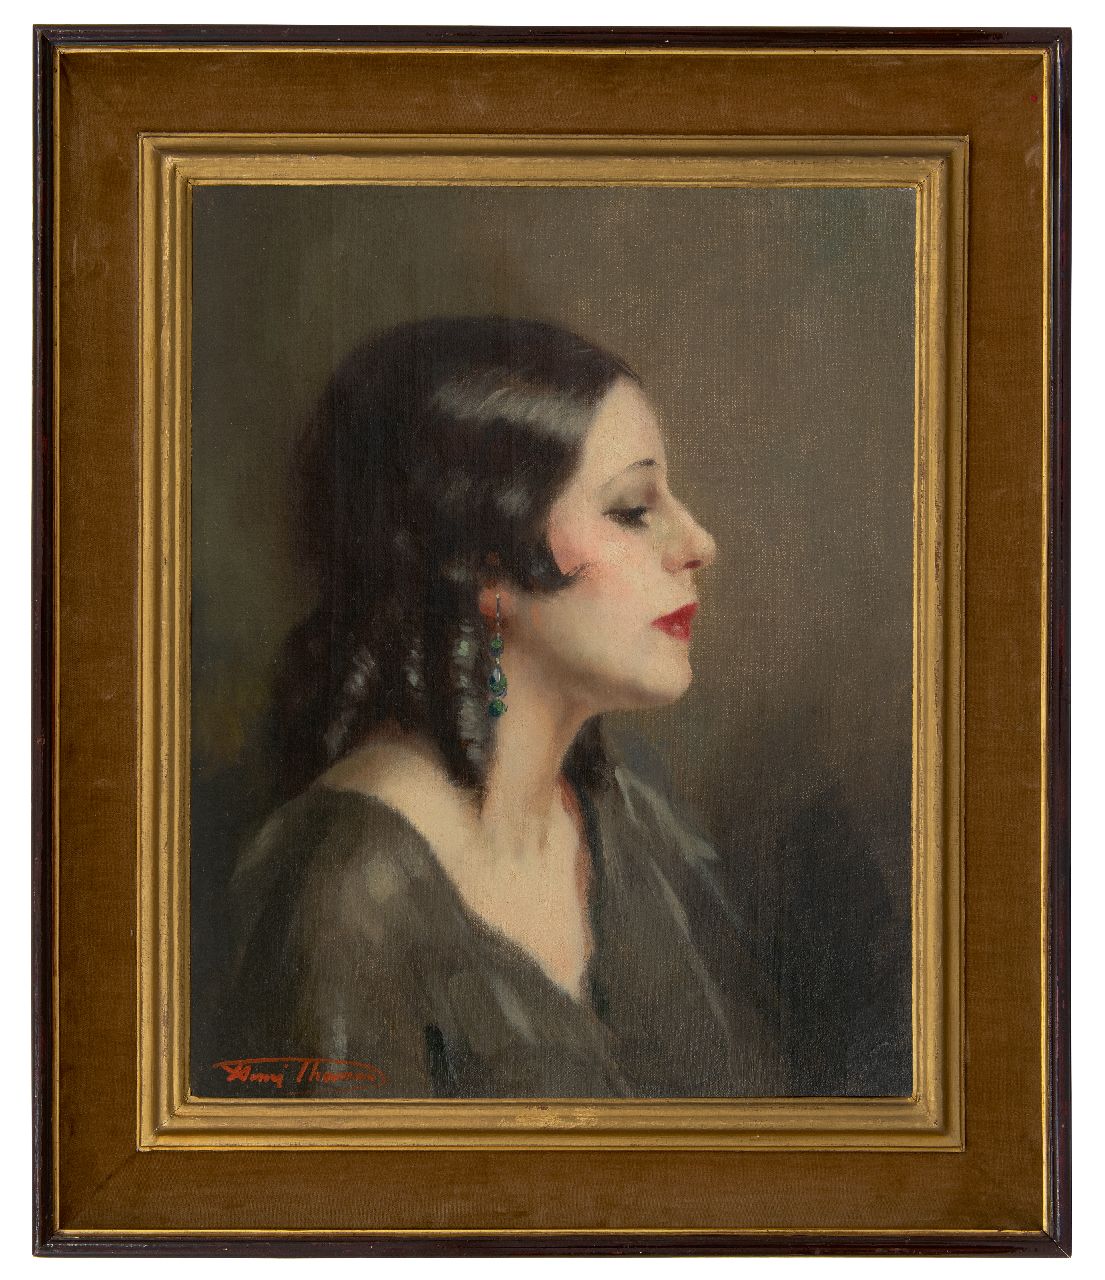 Thomas H.J.  | Henri Joseph Thomas | Paintings offered for sale | Portrait of a woman, in profile, oil on canvas 50.3 x 40.4 cm, signed l.l.